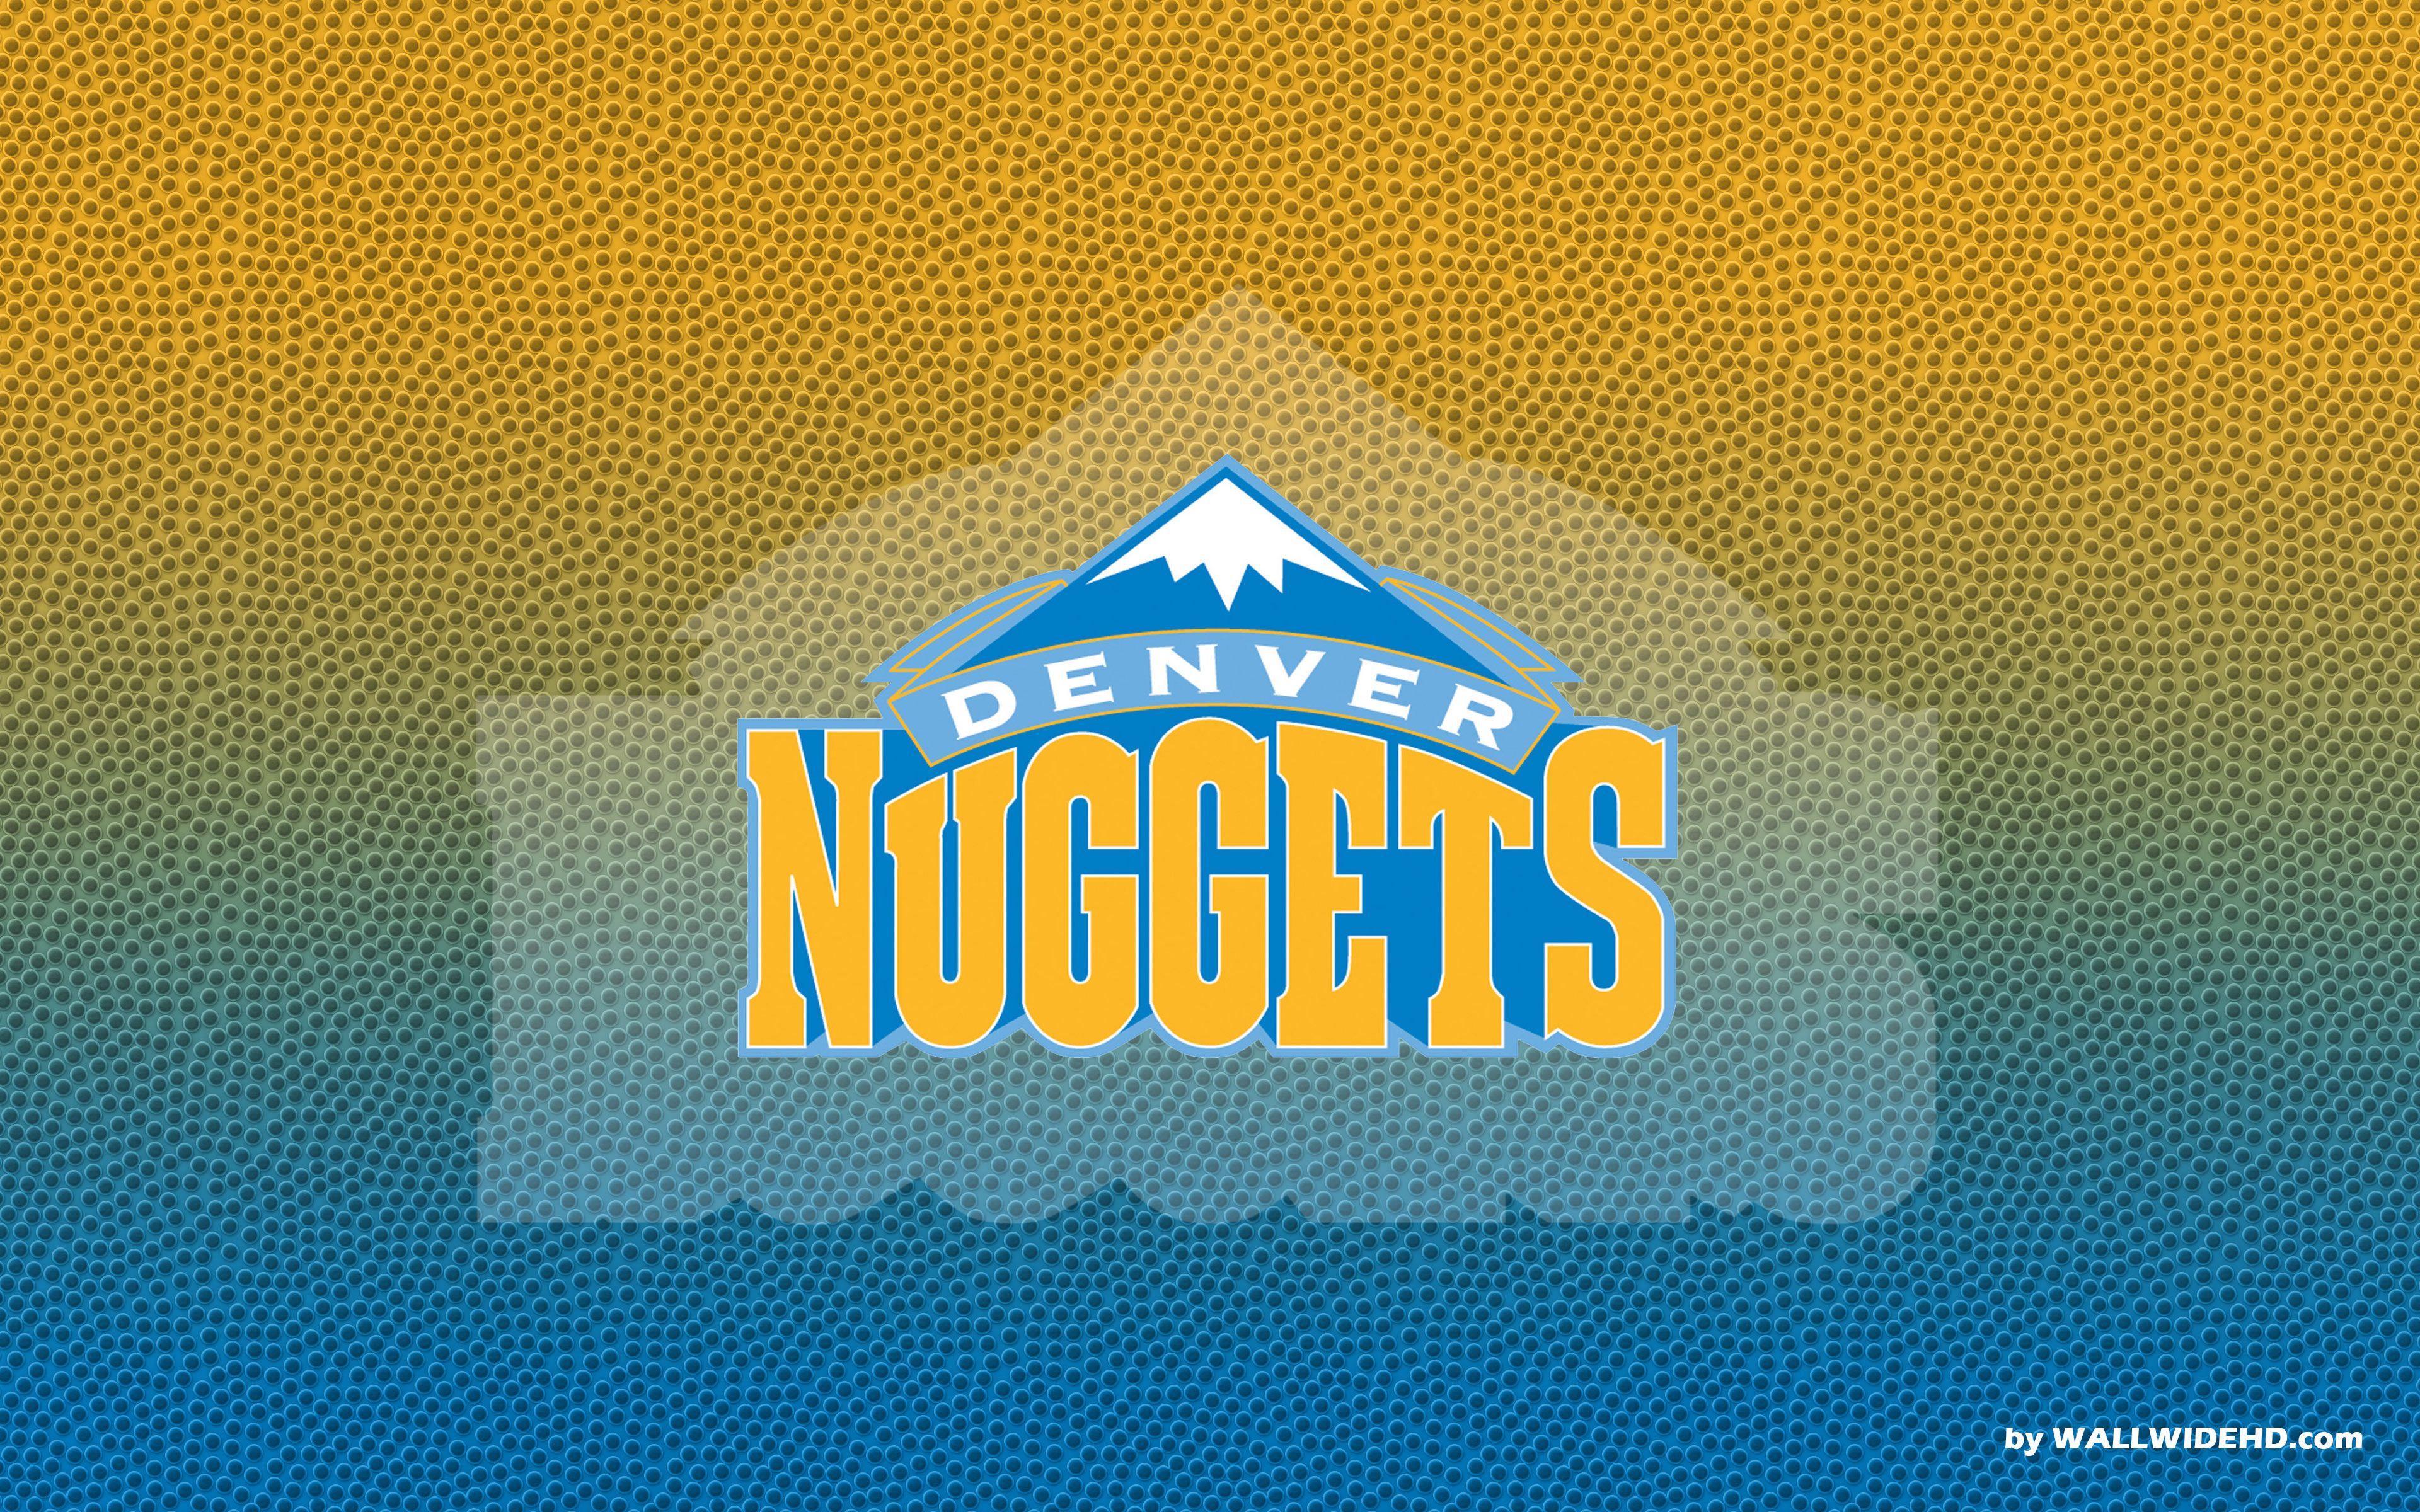 Awesome Denver Nuggets HQ Photo. World's Greatest Art Site